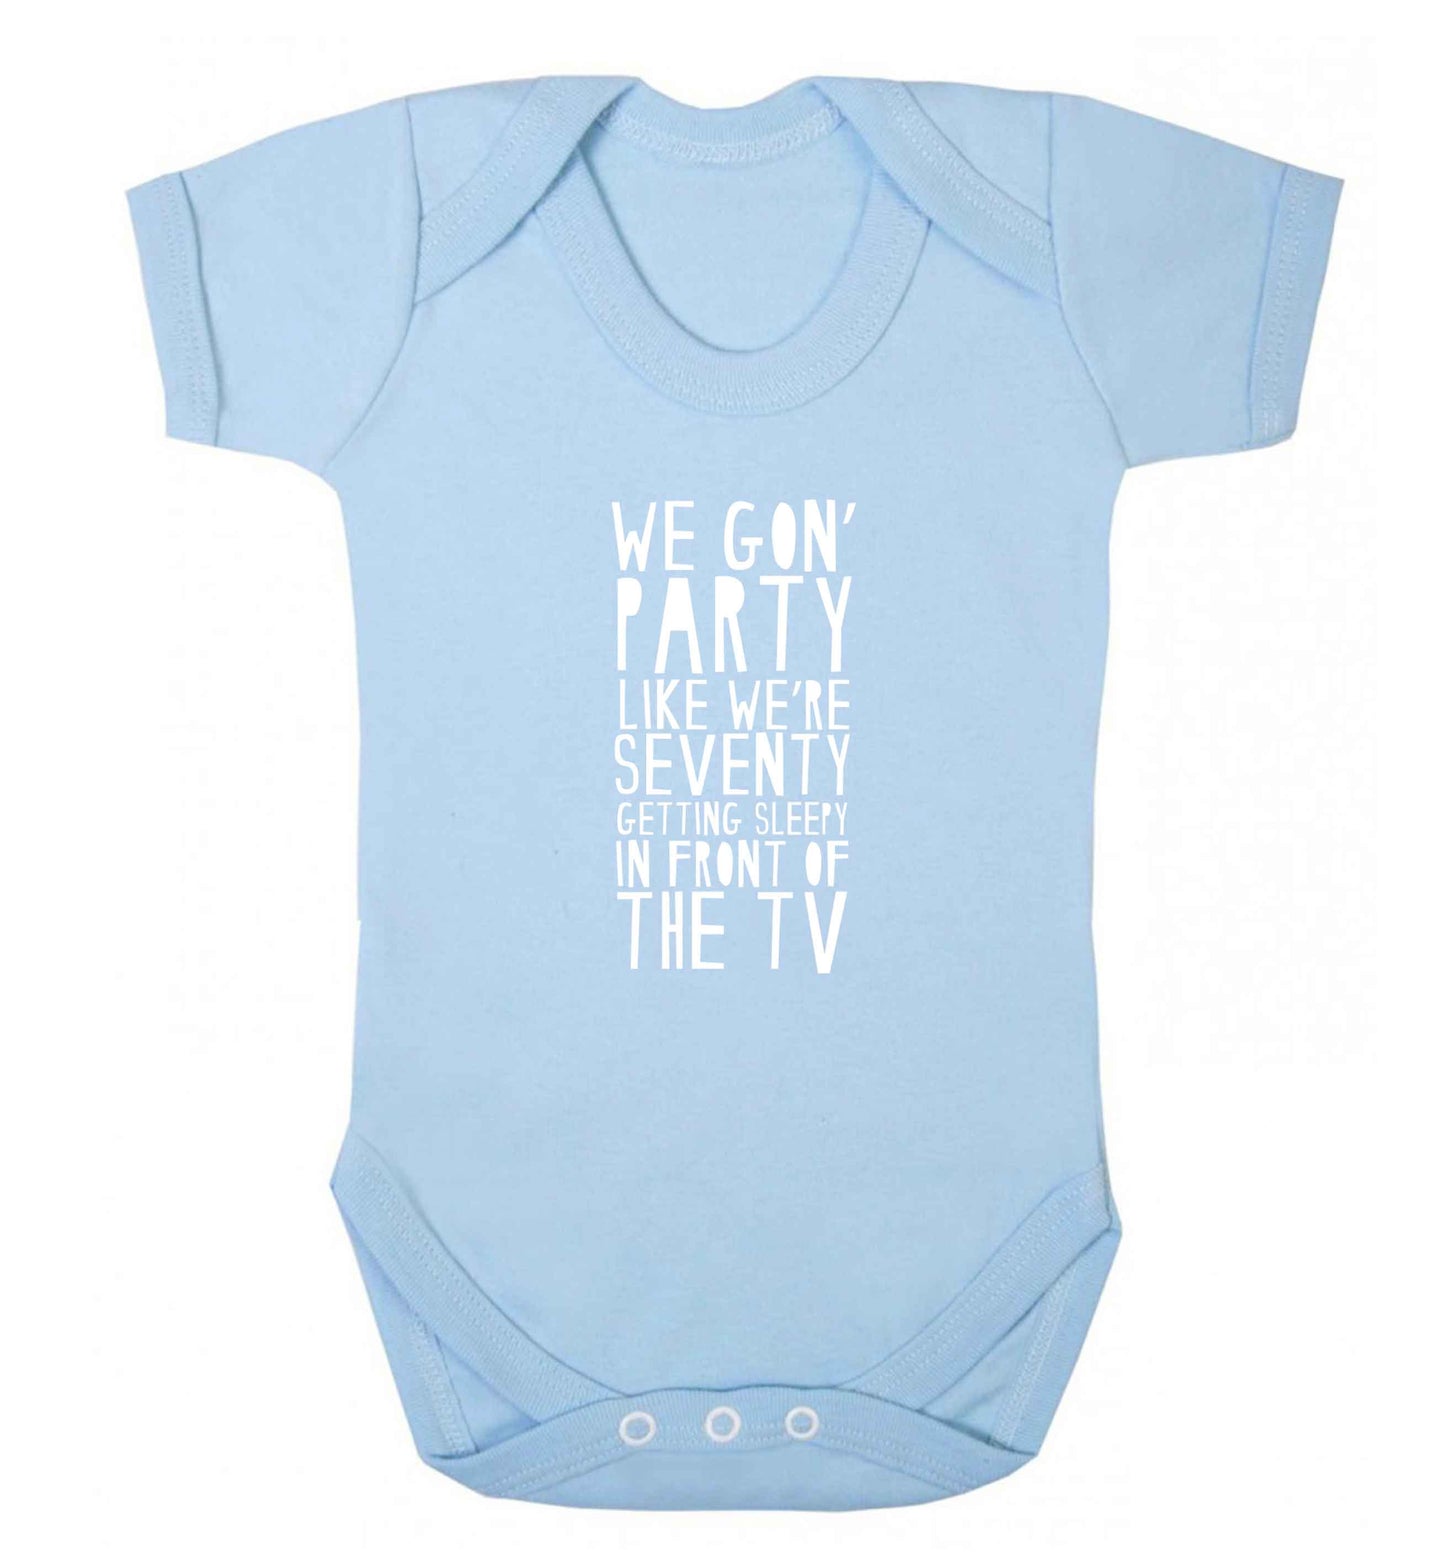 We gon' party like we're seventy getting sleepy in front of the TV baby vest pale blue 18-24 months